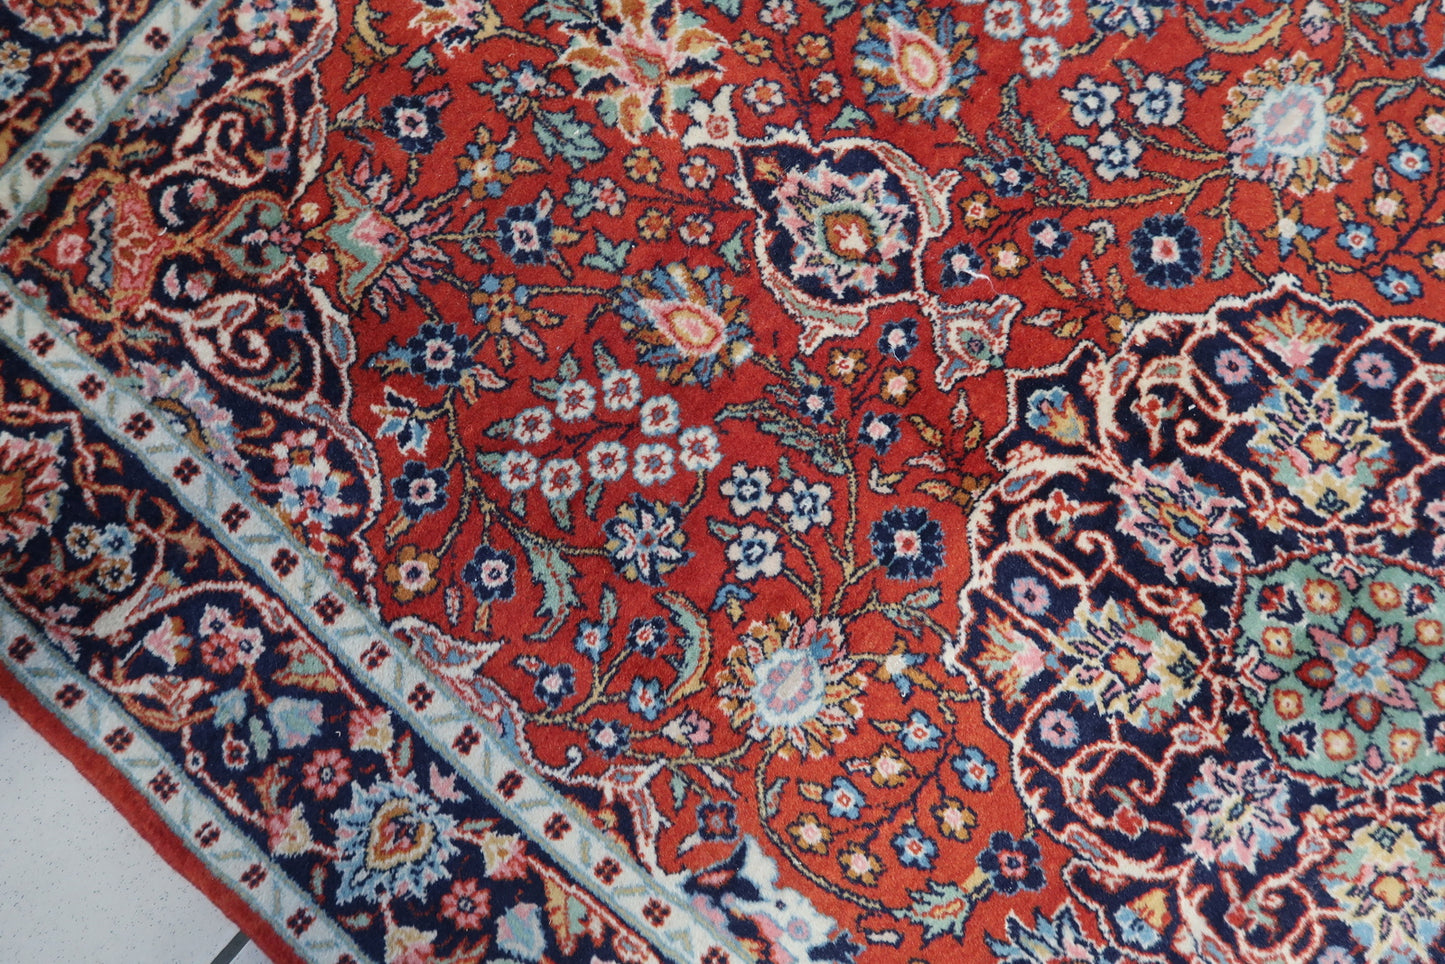 Detailed picture capturing the vintage charm and timeless beauty of the Persian Kashan rug.